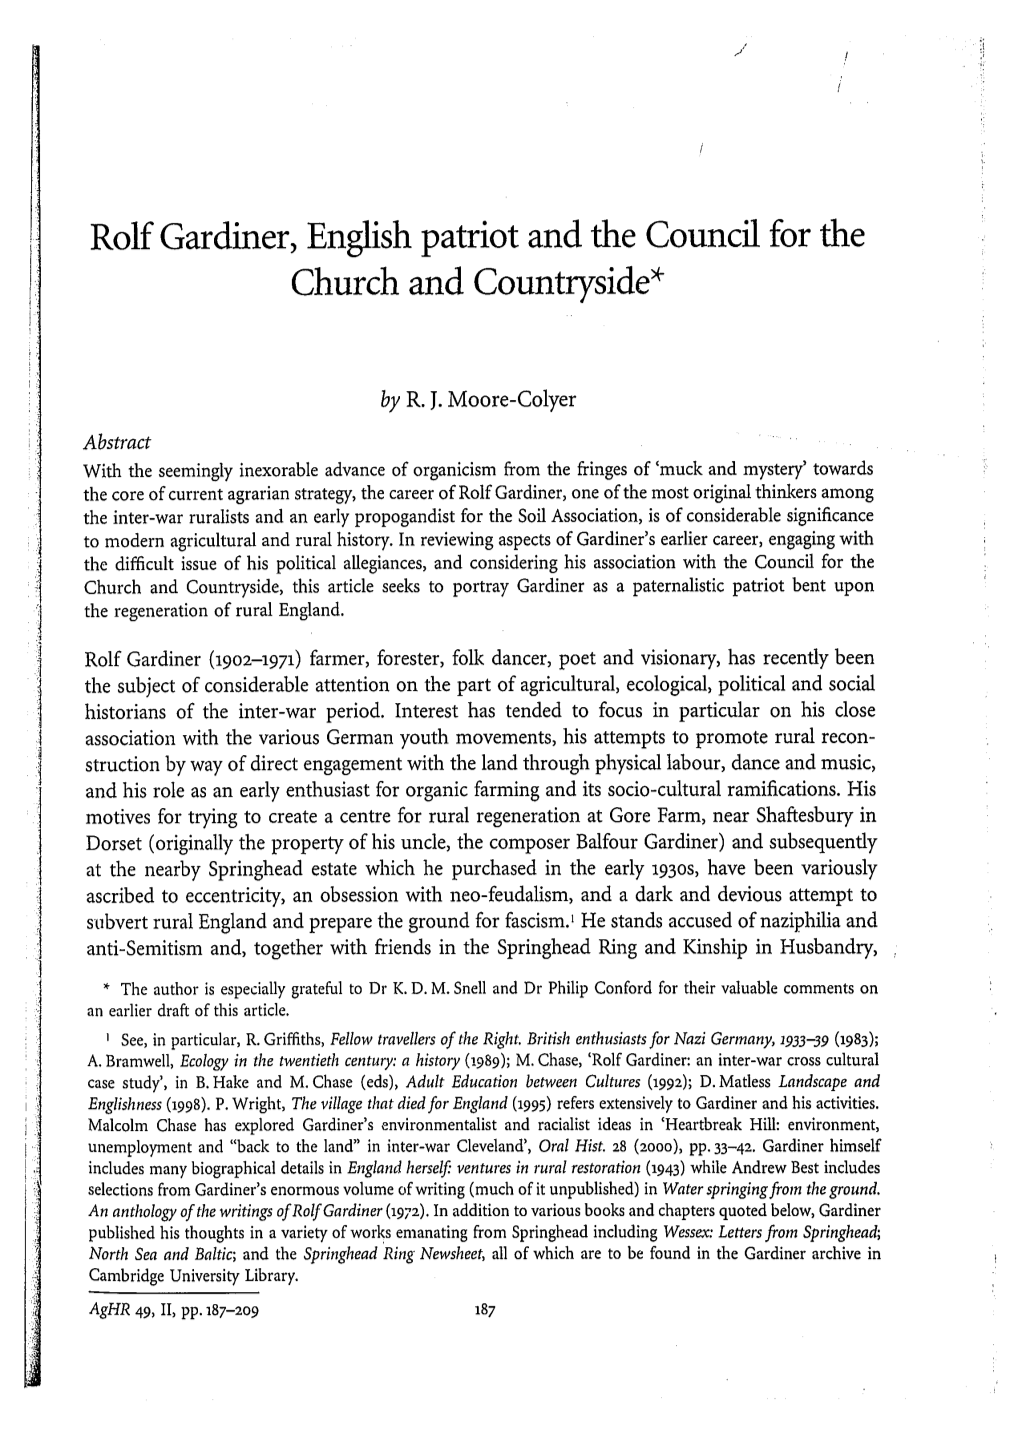 Rolf Gardiner, English Patriot and the Council for the Church and Countryside*